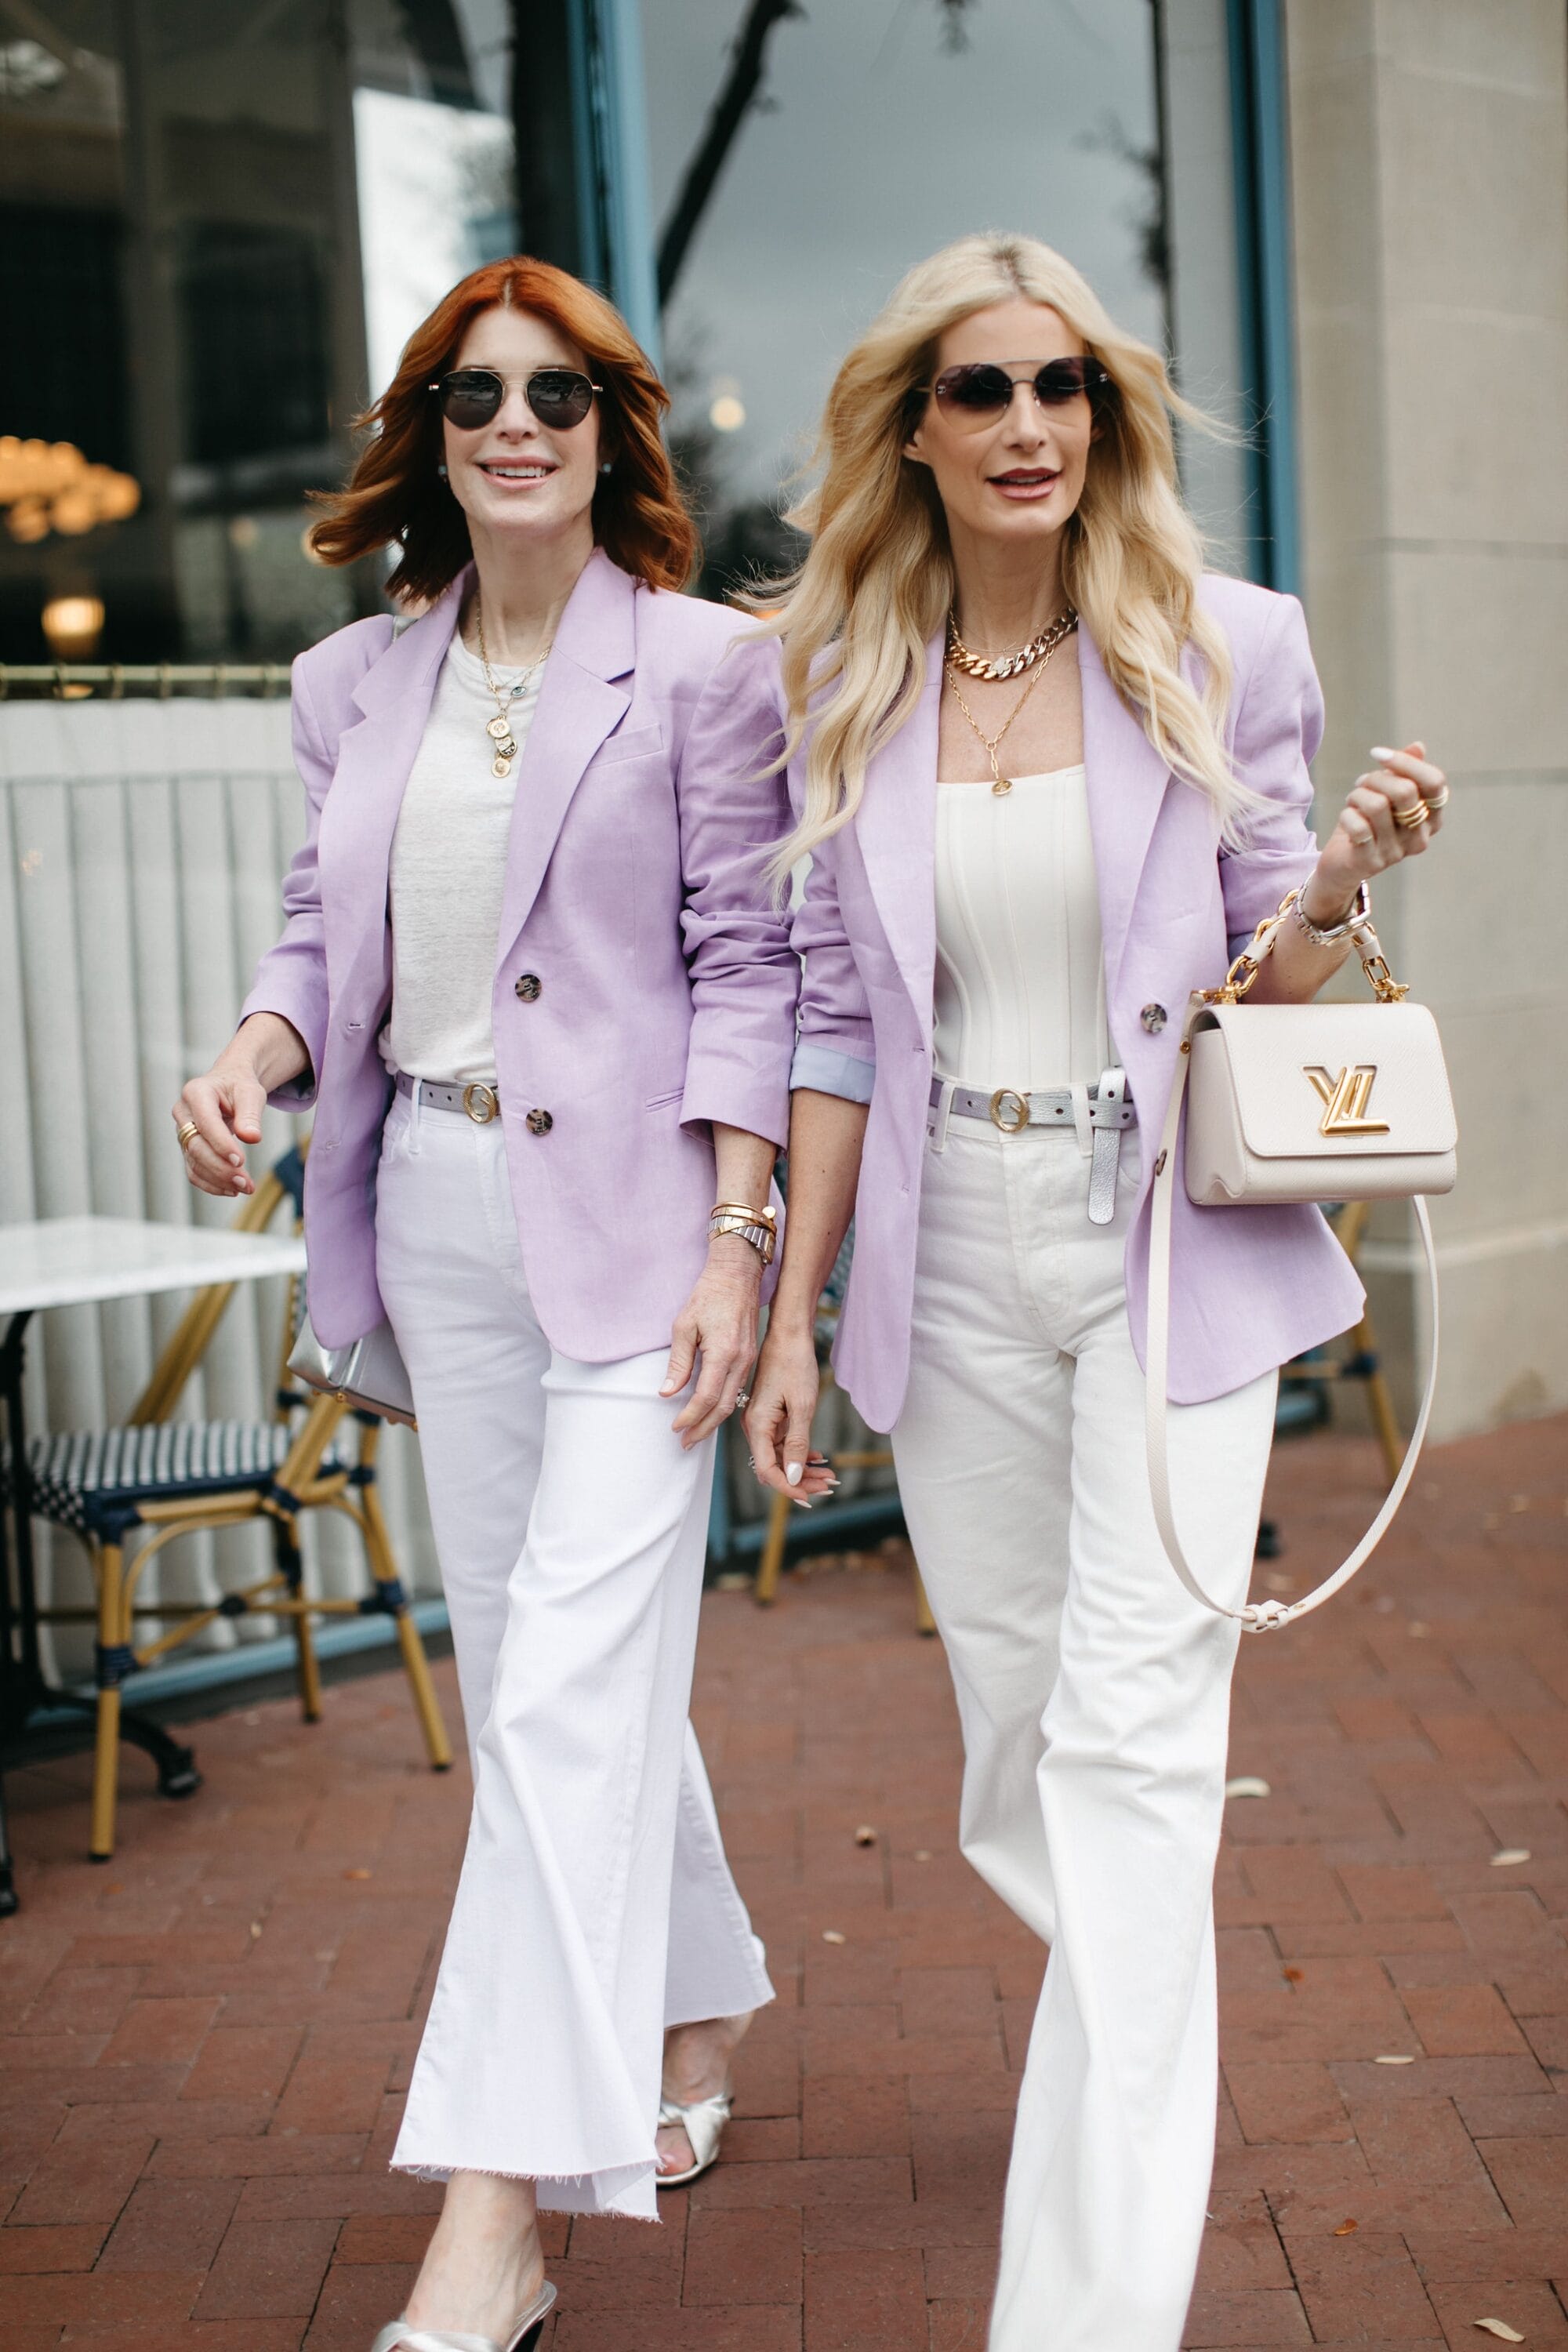 5 Ways To Wear White Jeans In Fall